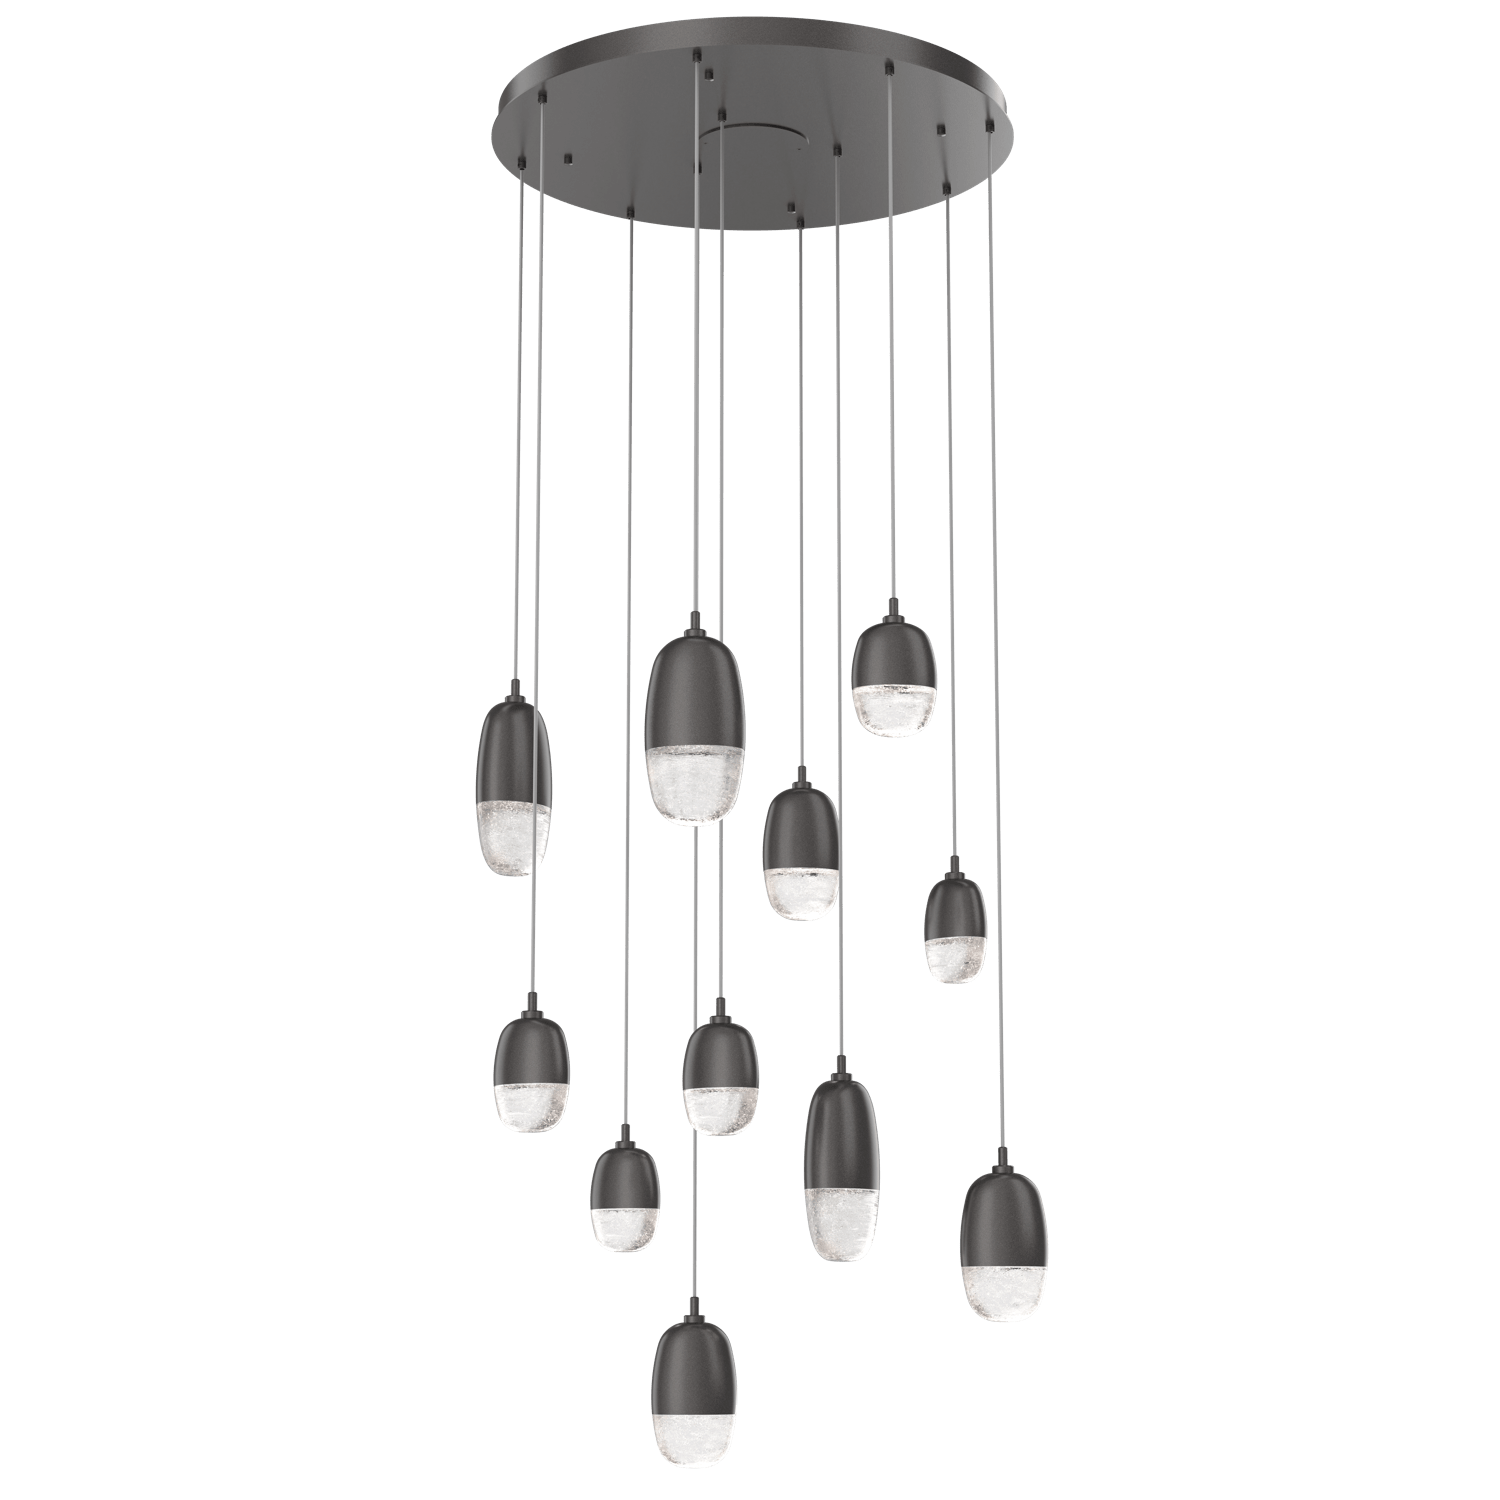 CHB0079-11-GP-Hammerton-Studio-Pebble-11-light-round-pendant-chandelier-with-graphite-finish-and-clear-cast-glass-shades-and-LED-lamping